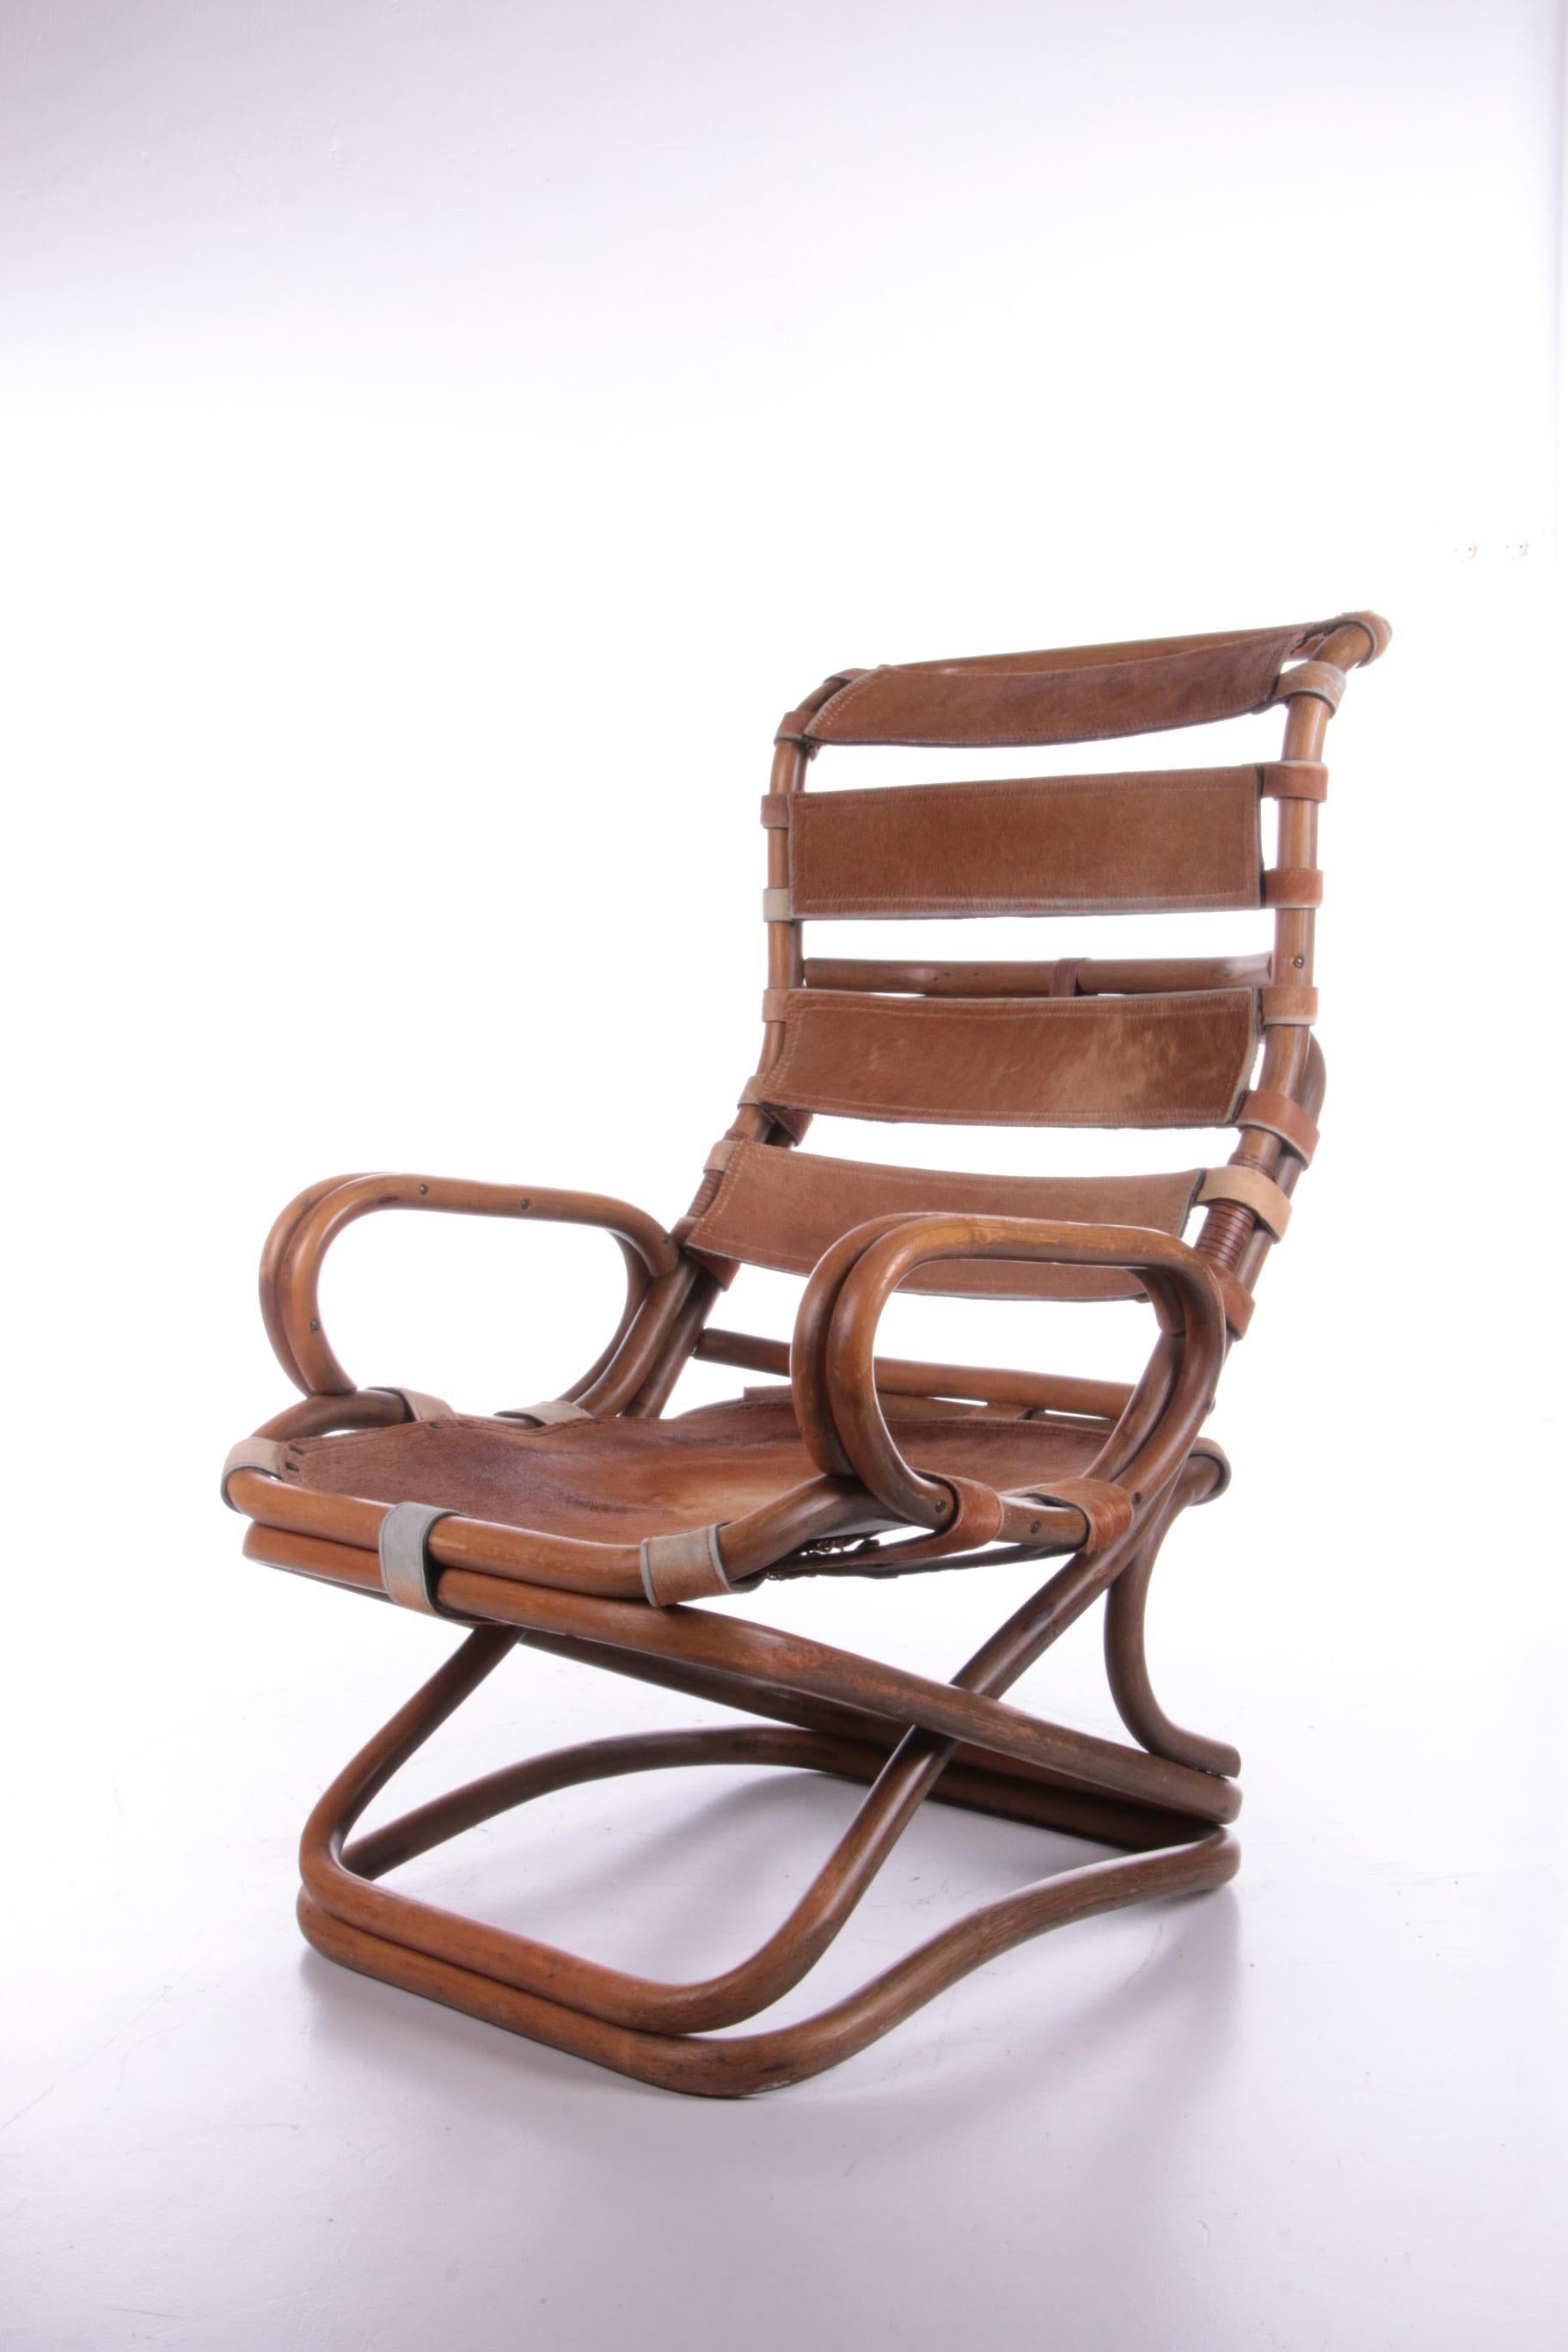 Tito Agnoli Relax Chair Made of Bamboo and Leather, 1960 In Good Condition For Sale In Oostrum-Venray, NL